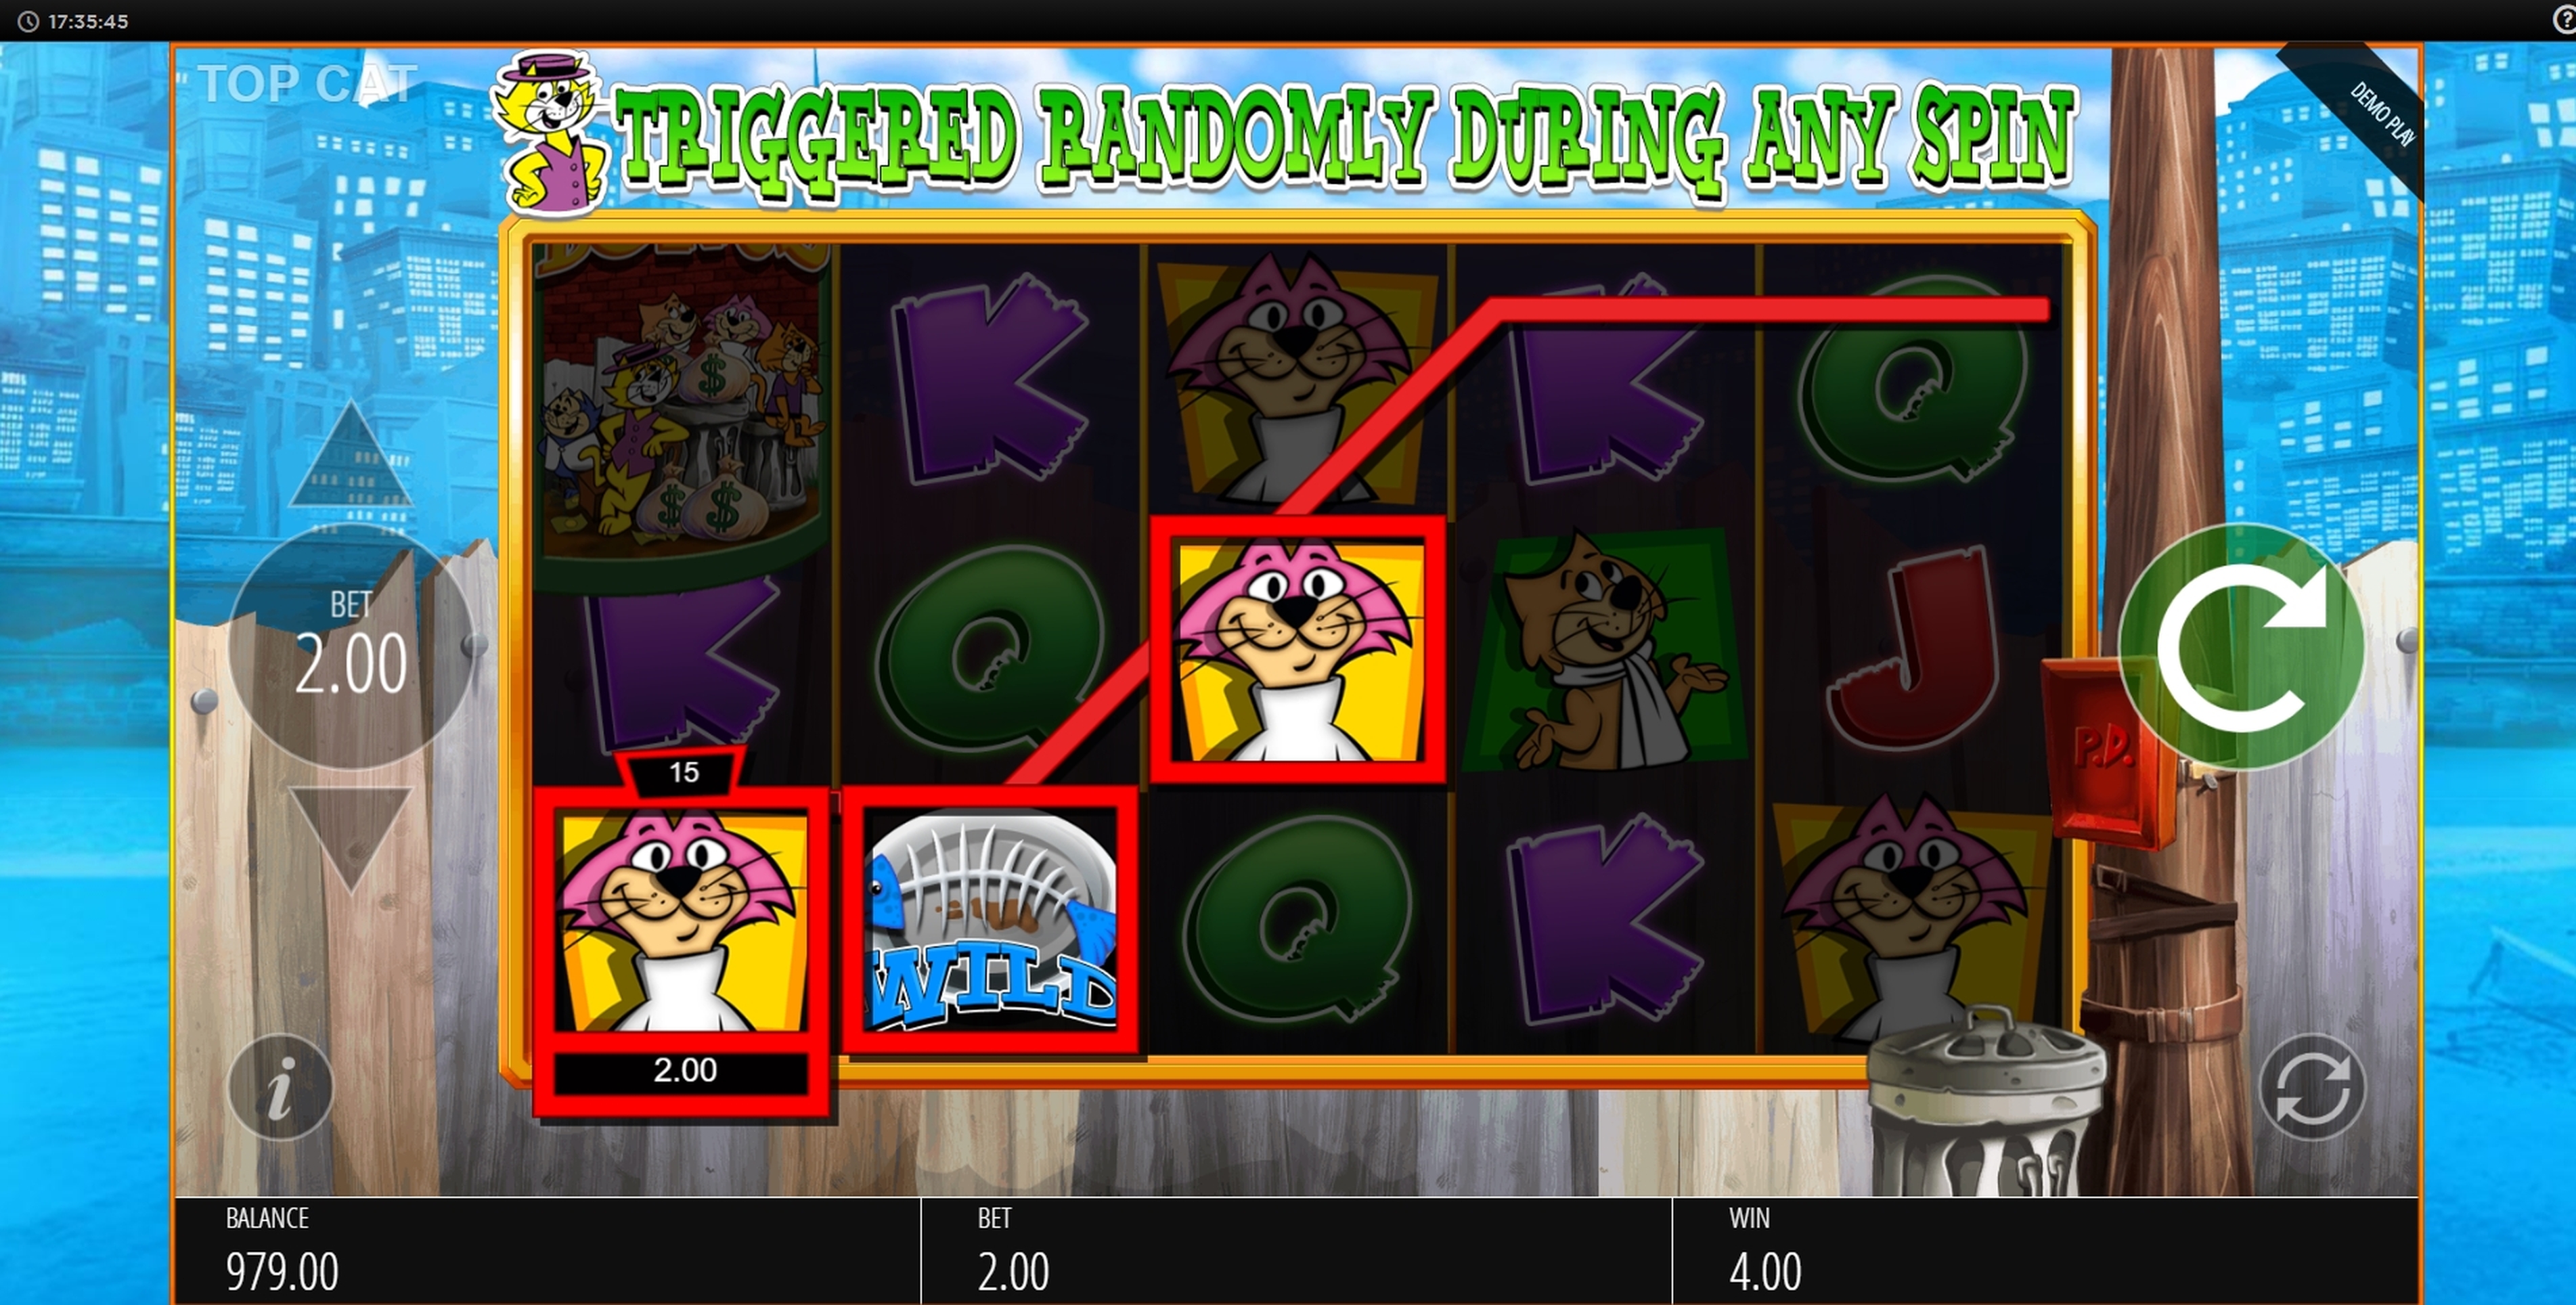 Win Money in Top Cat Free Slot Game by Blueprint Gaming